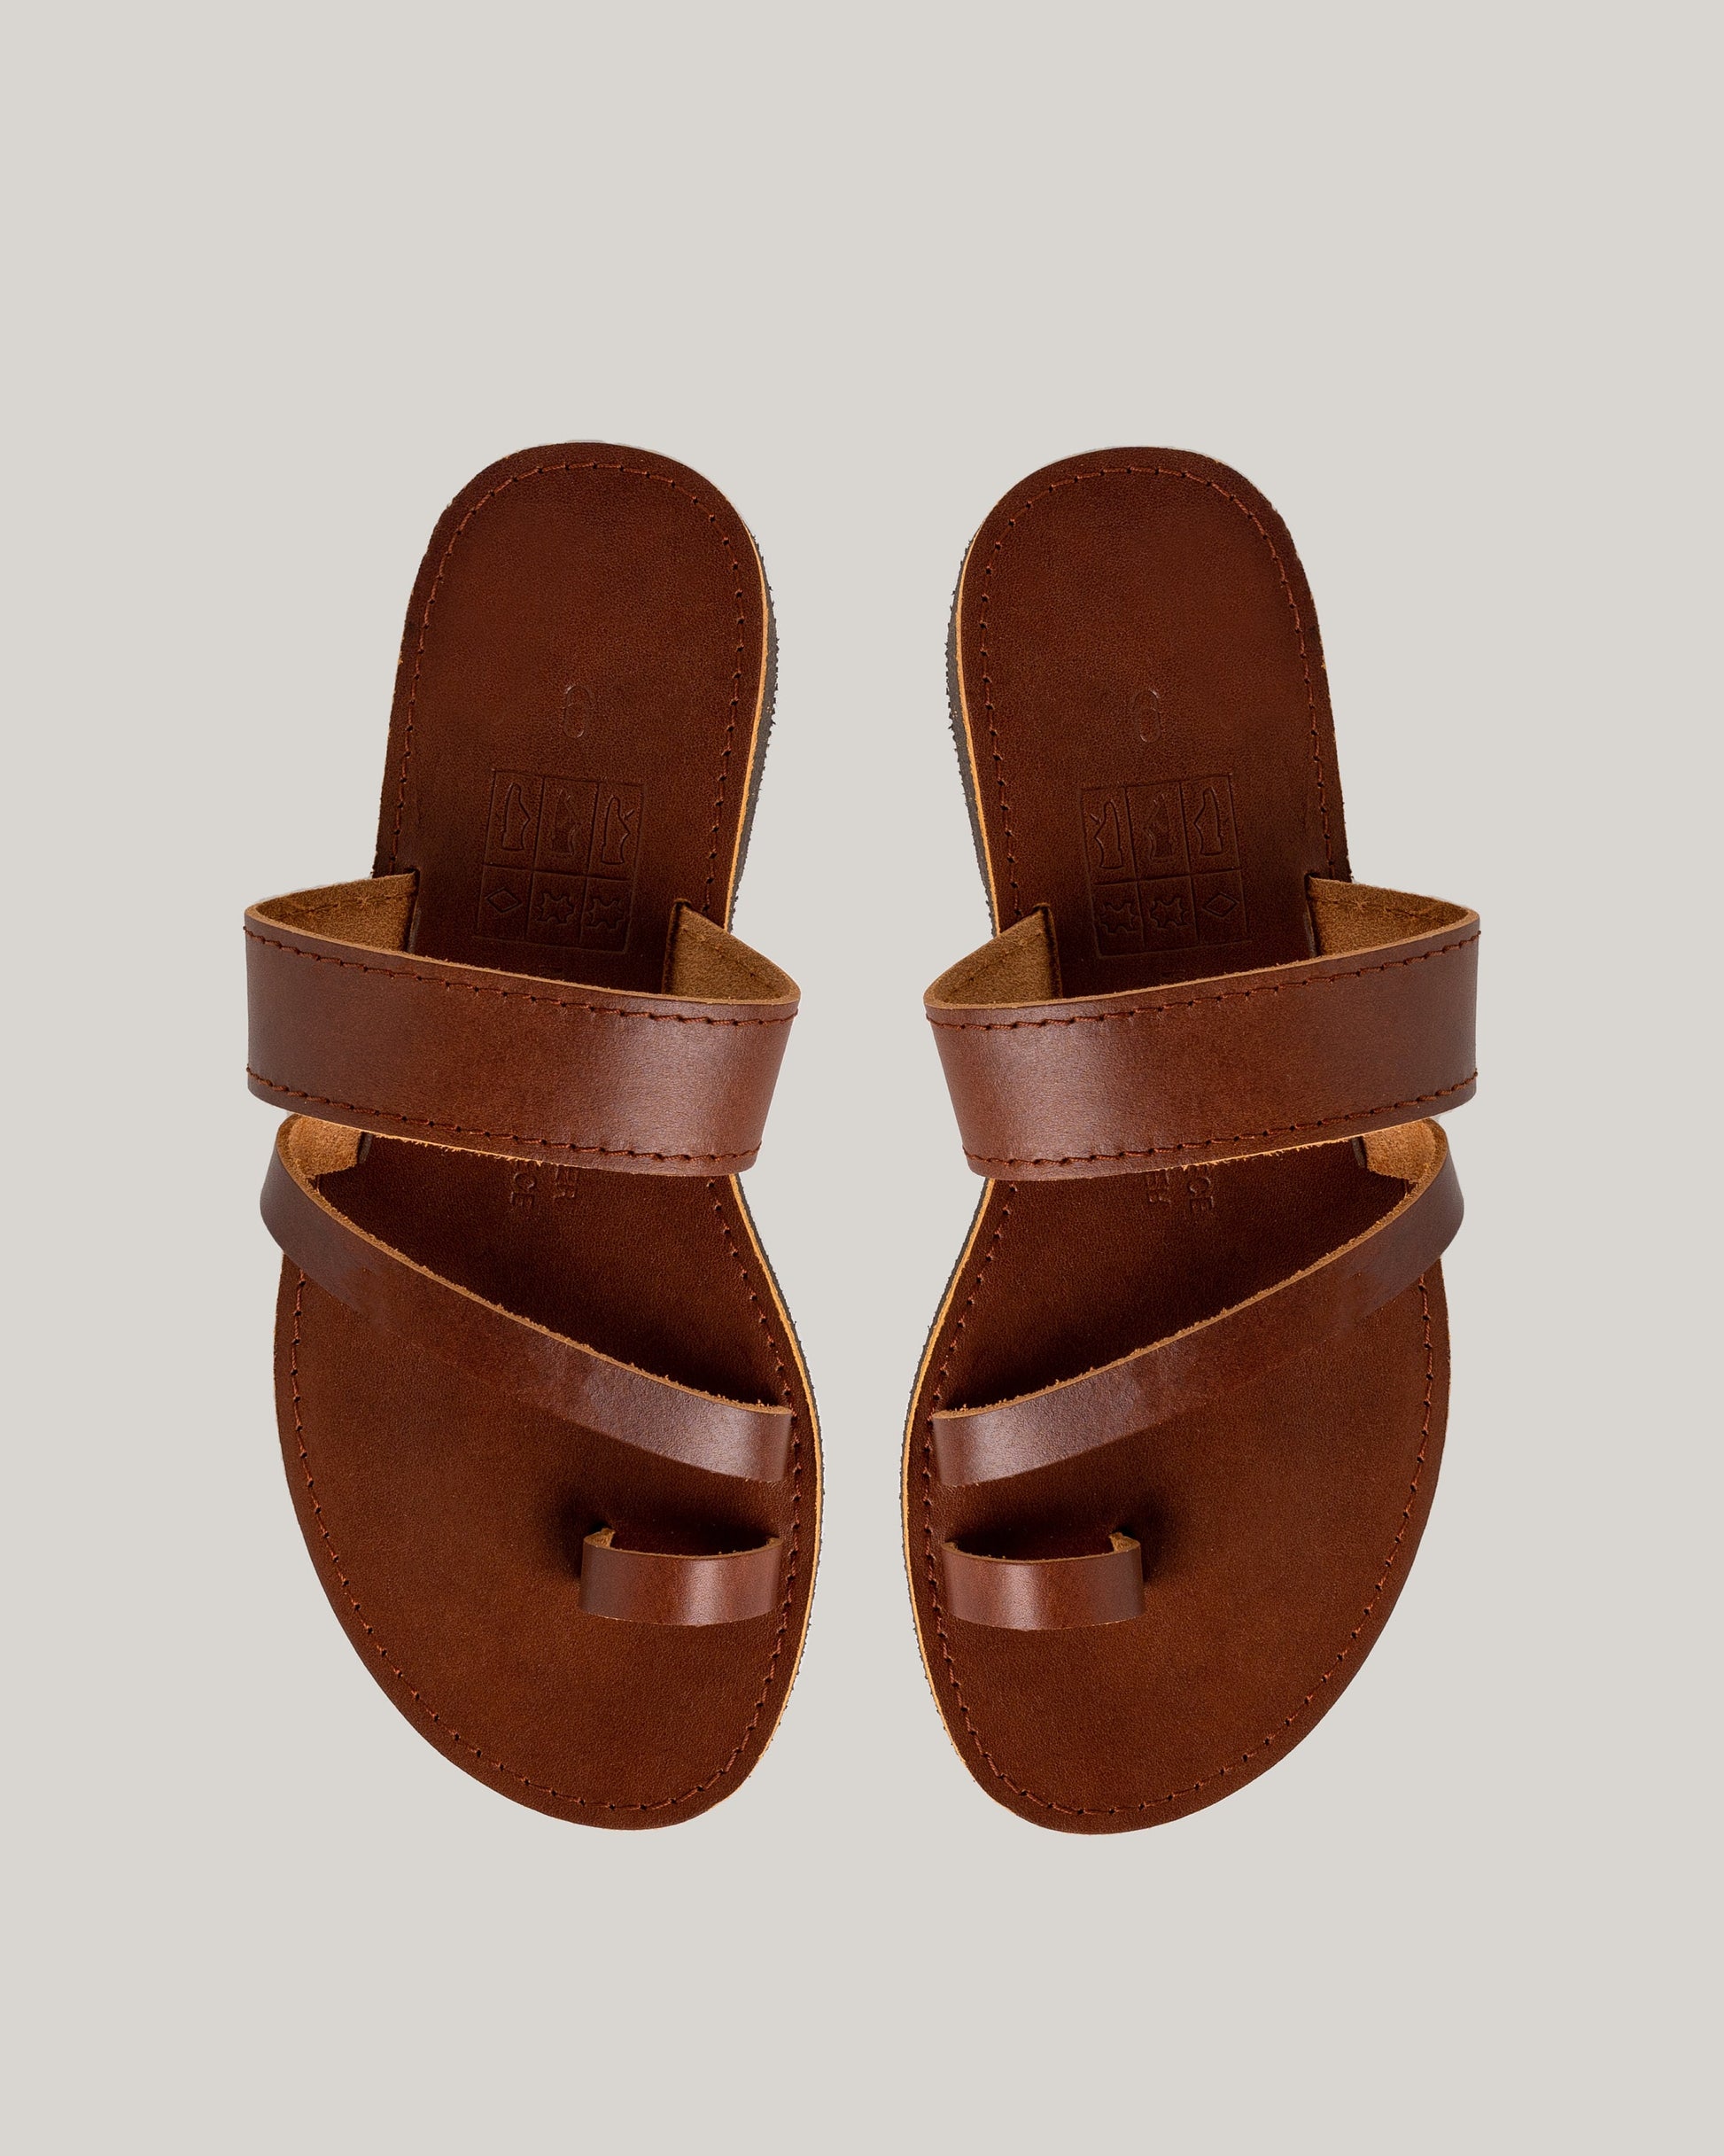 Brown leather sandals women, Toe ring leather sandals, Roman sandals, Flat leather sandals, Calf leather, Barefoot sandals